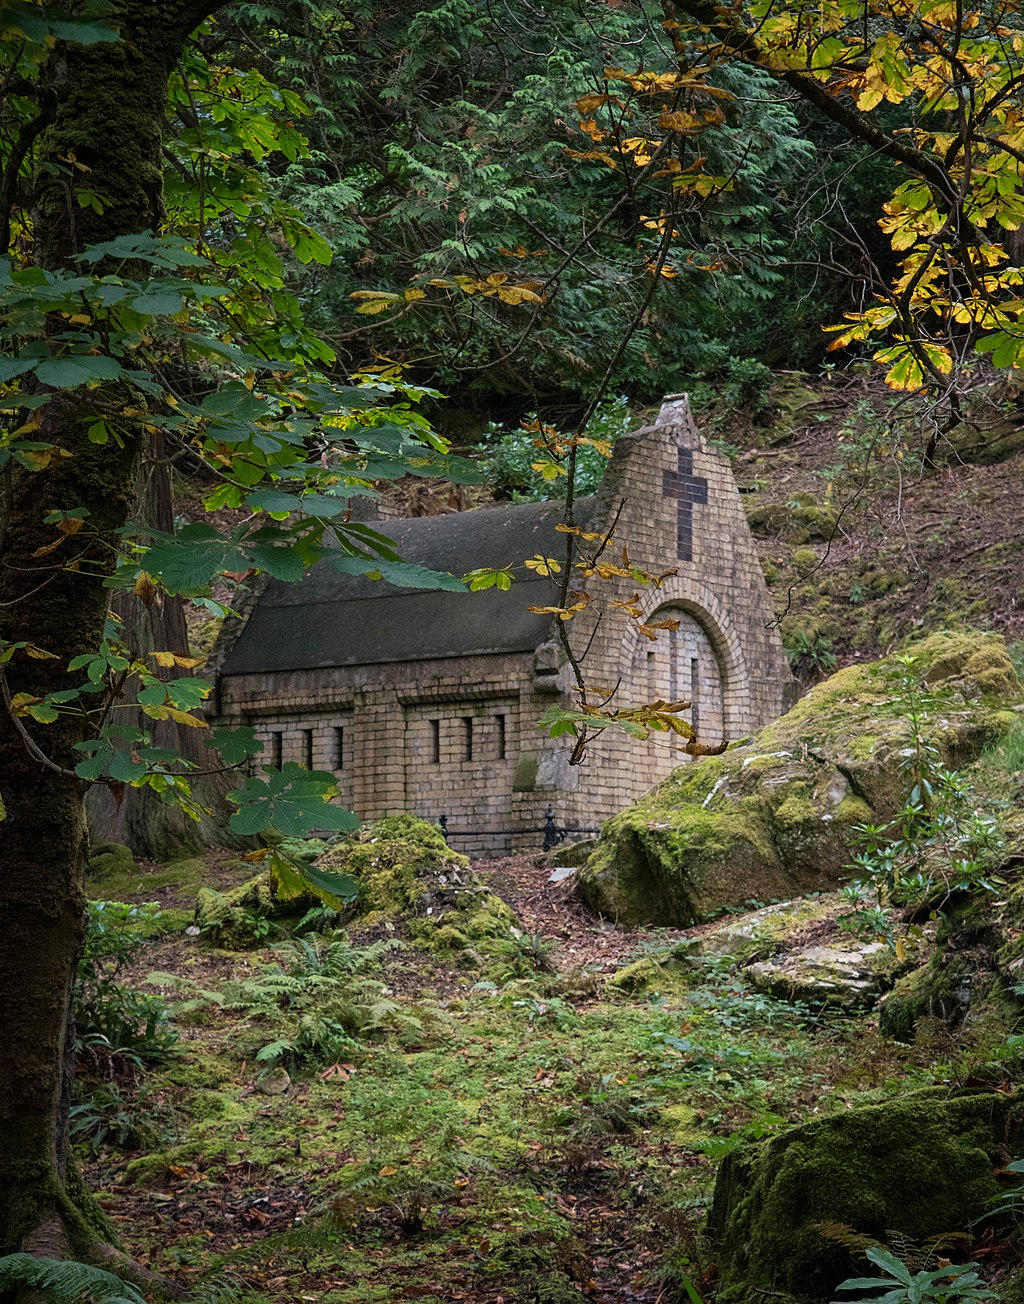 A photograph of Henry Mausoleum in Galway, a small stone building in an autumnal forest